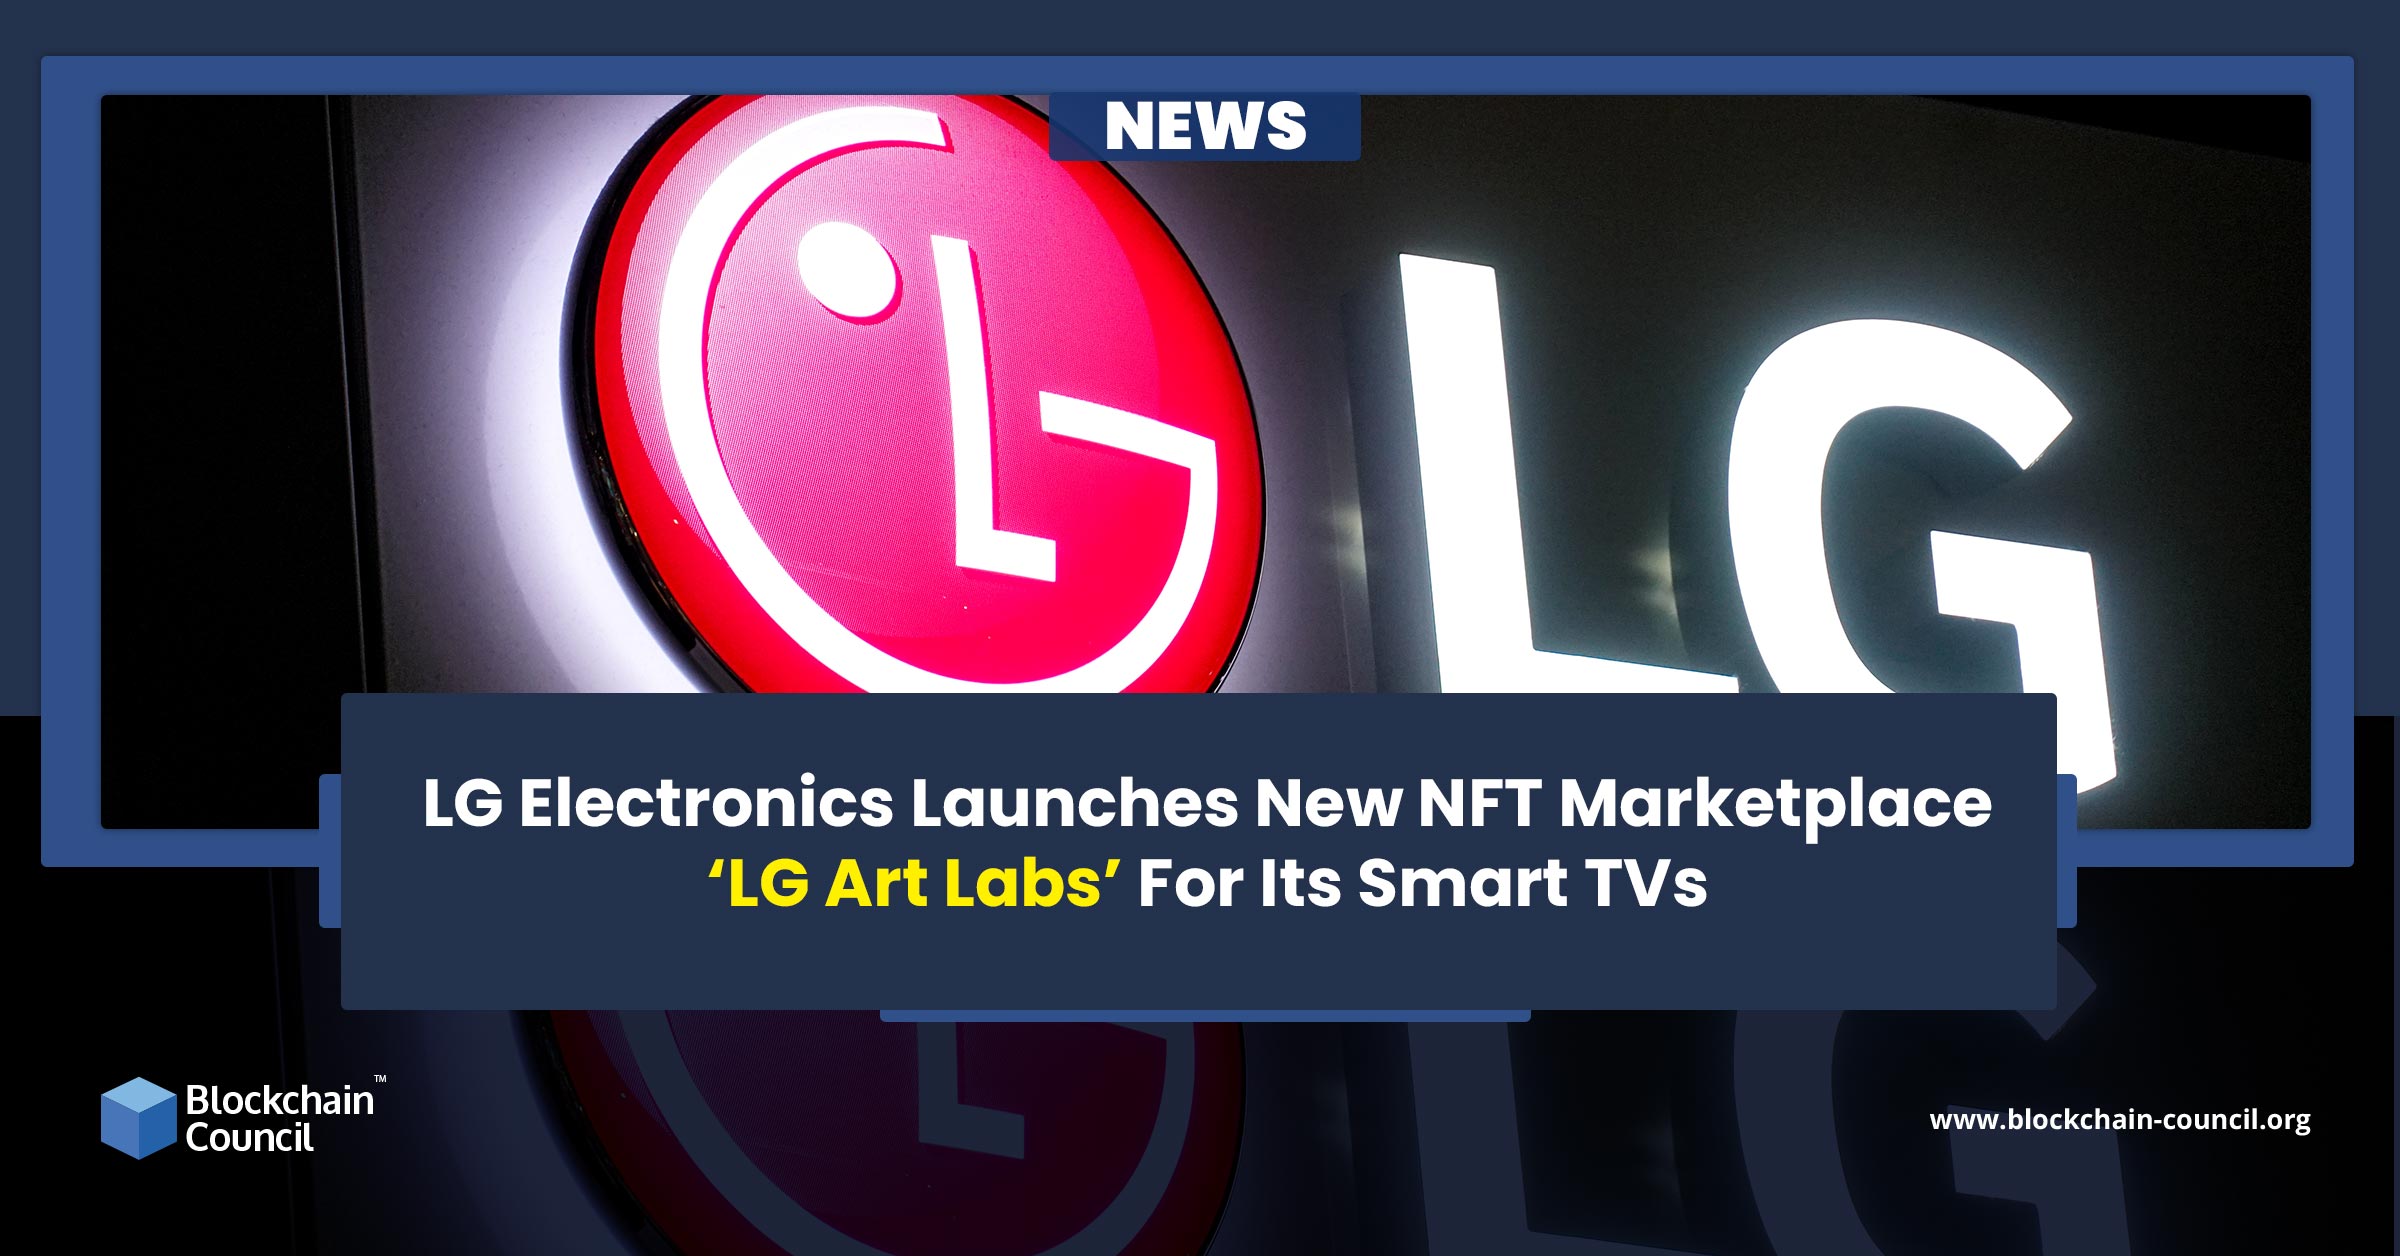 LG Electronics Launches New NFT Marketplace ‘LG Art Labs’ For Its Smart TVs